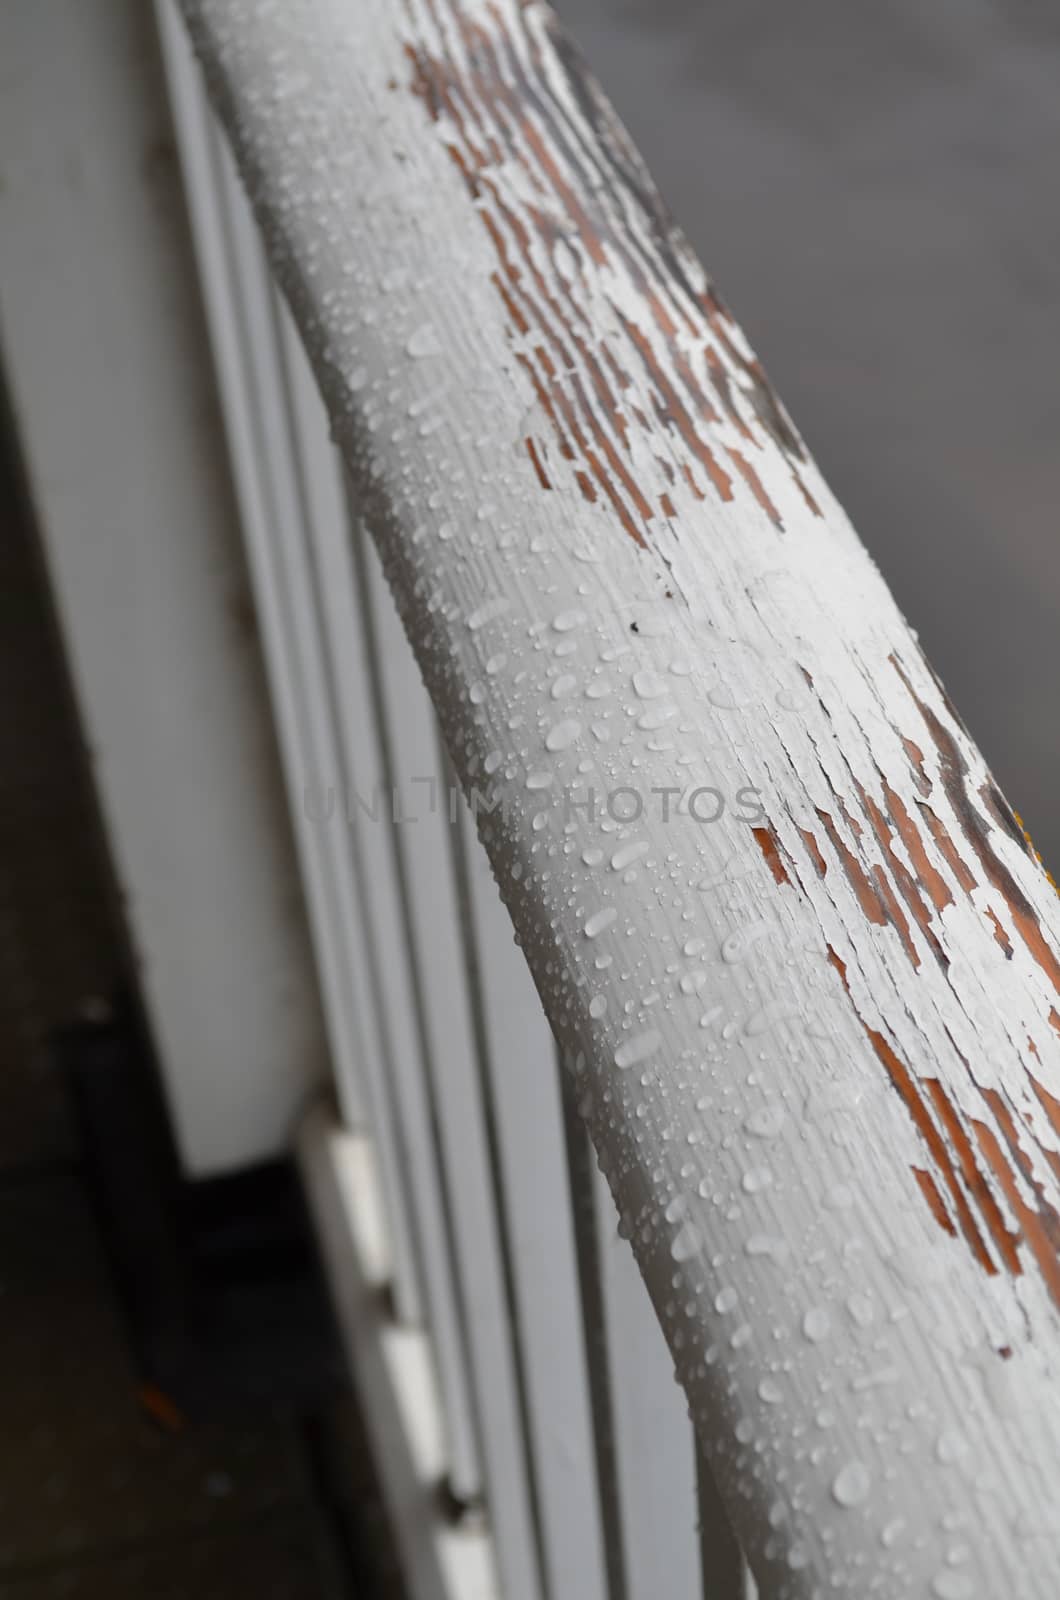 Weathered paint on wooden handrail. by bunsview